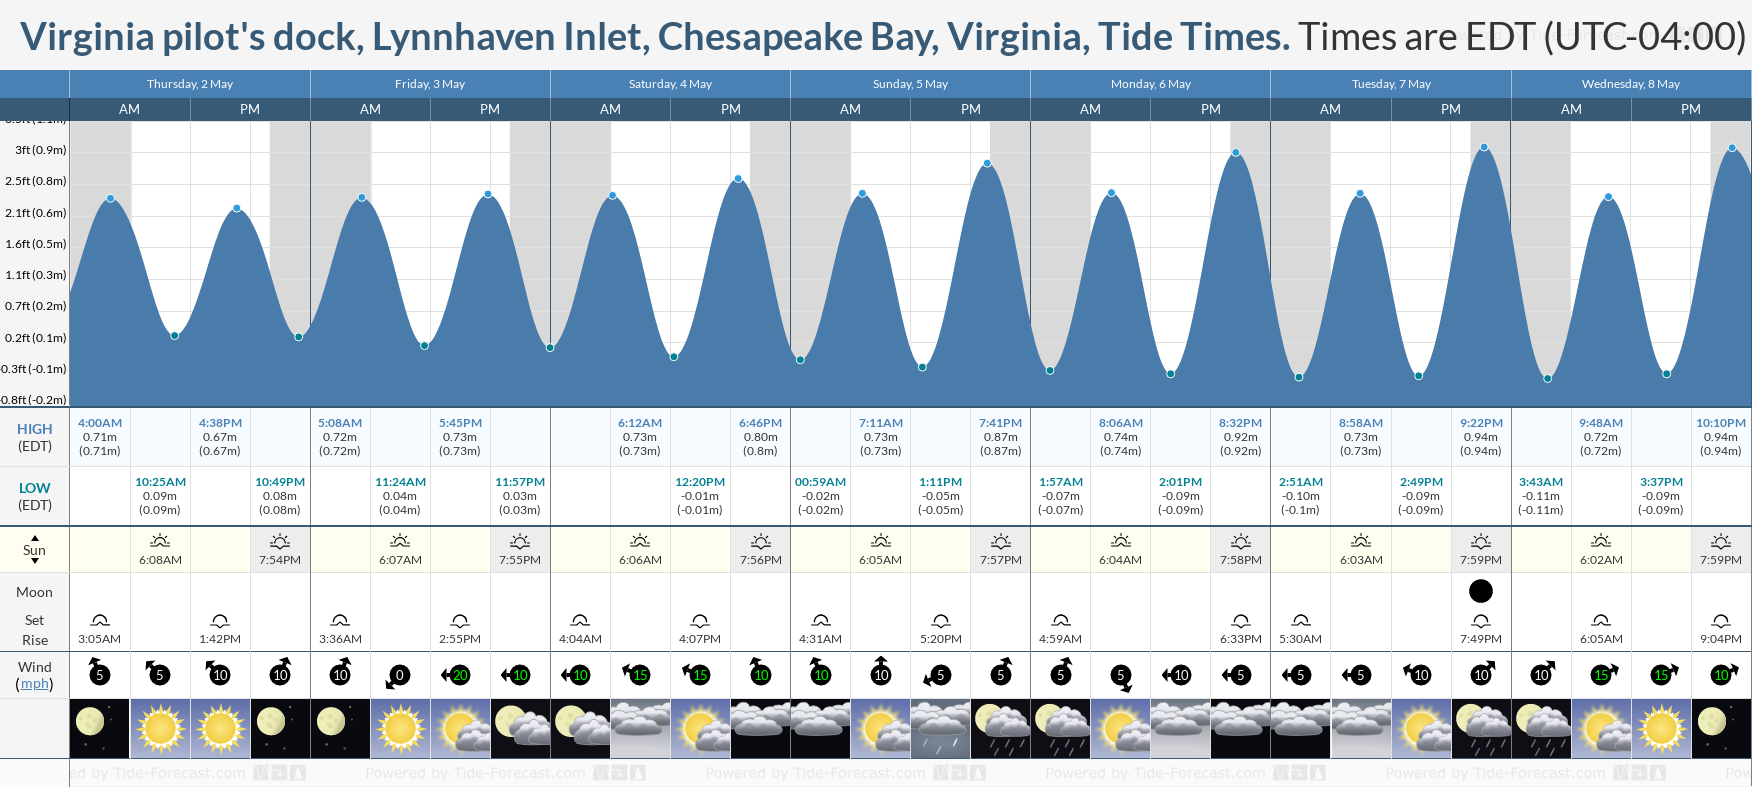 Virginia pilot's dock, Lynnhaven Inlet, Chesapeake Bay, Virginia Tide Chart including high and low tide tide times for the next 7 days